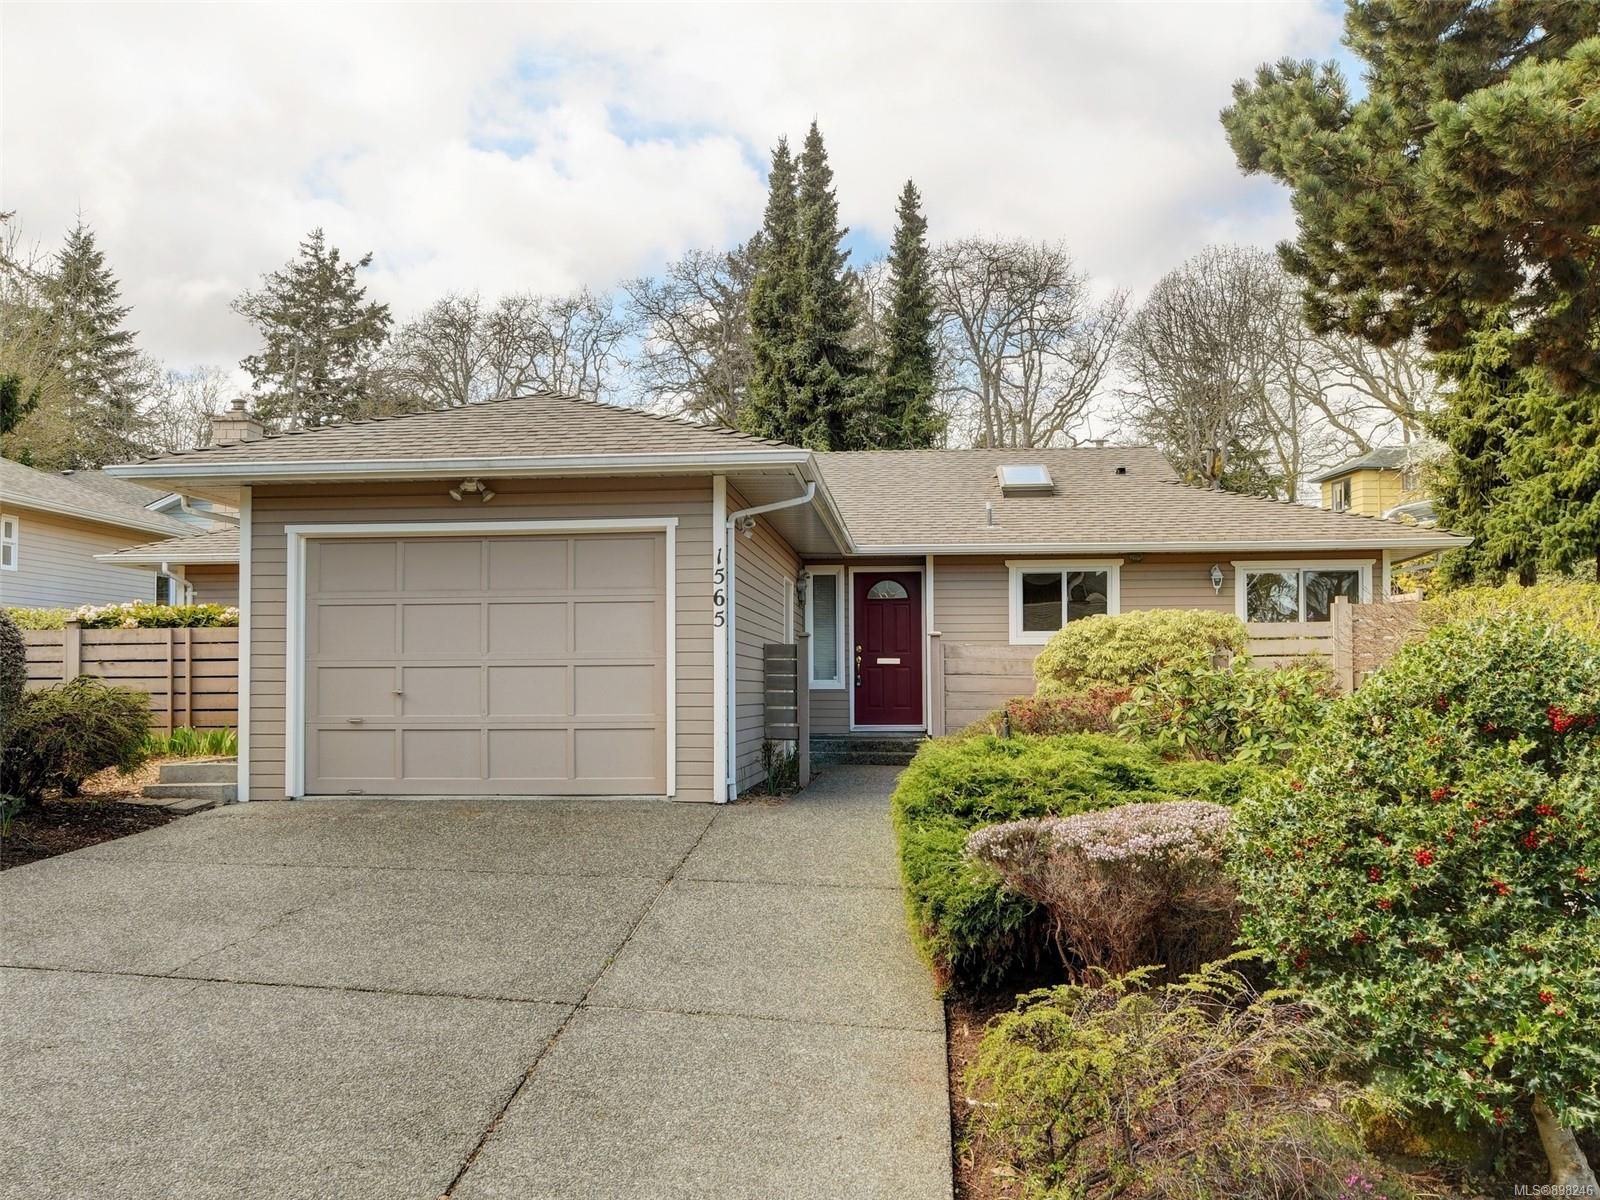 New property listed in SE Mt Doug, Saanich East